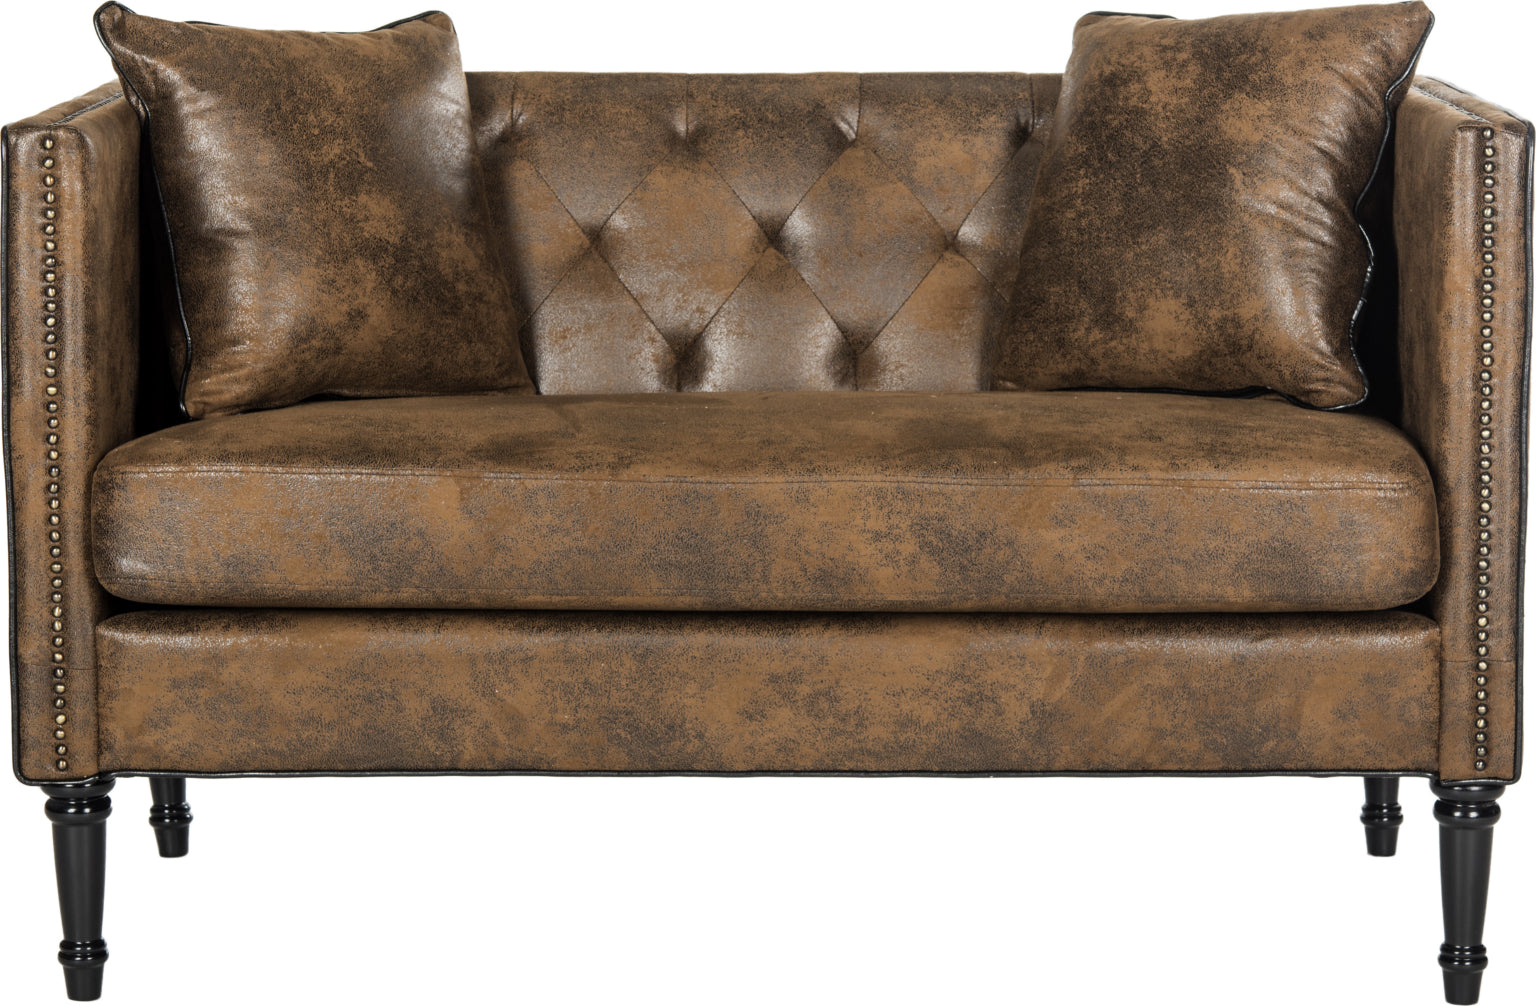 Safavieh Sarah Tufted Settee With Pillows Vintage Brown and Espresso Furniture main image